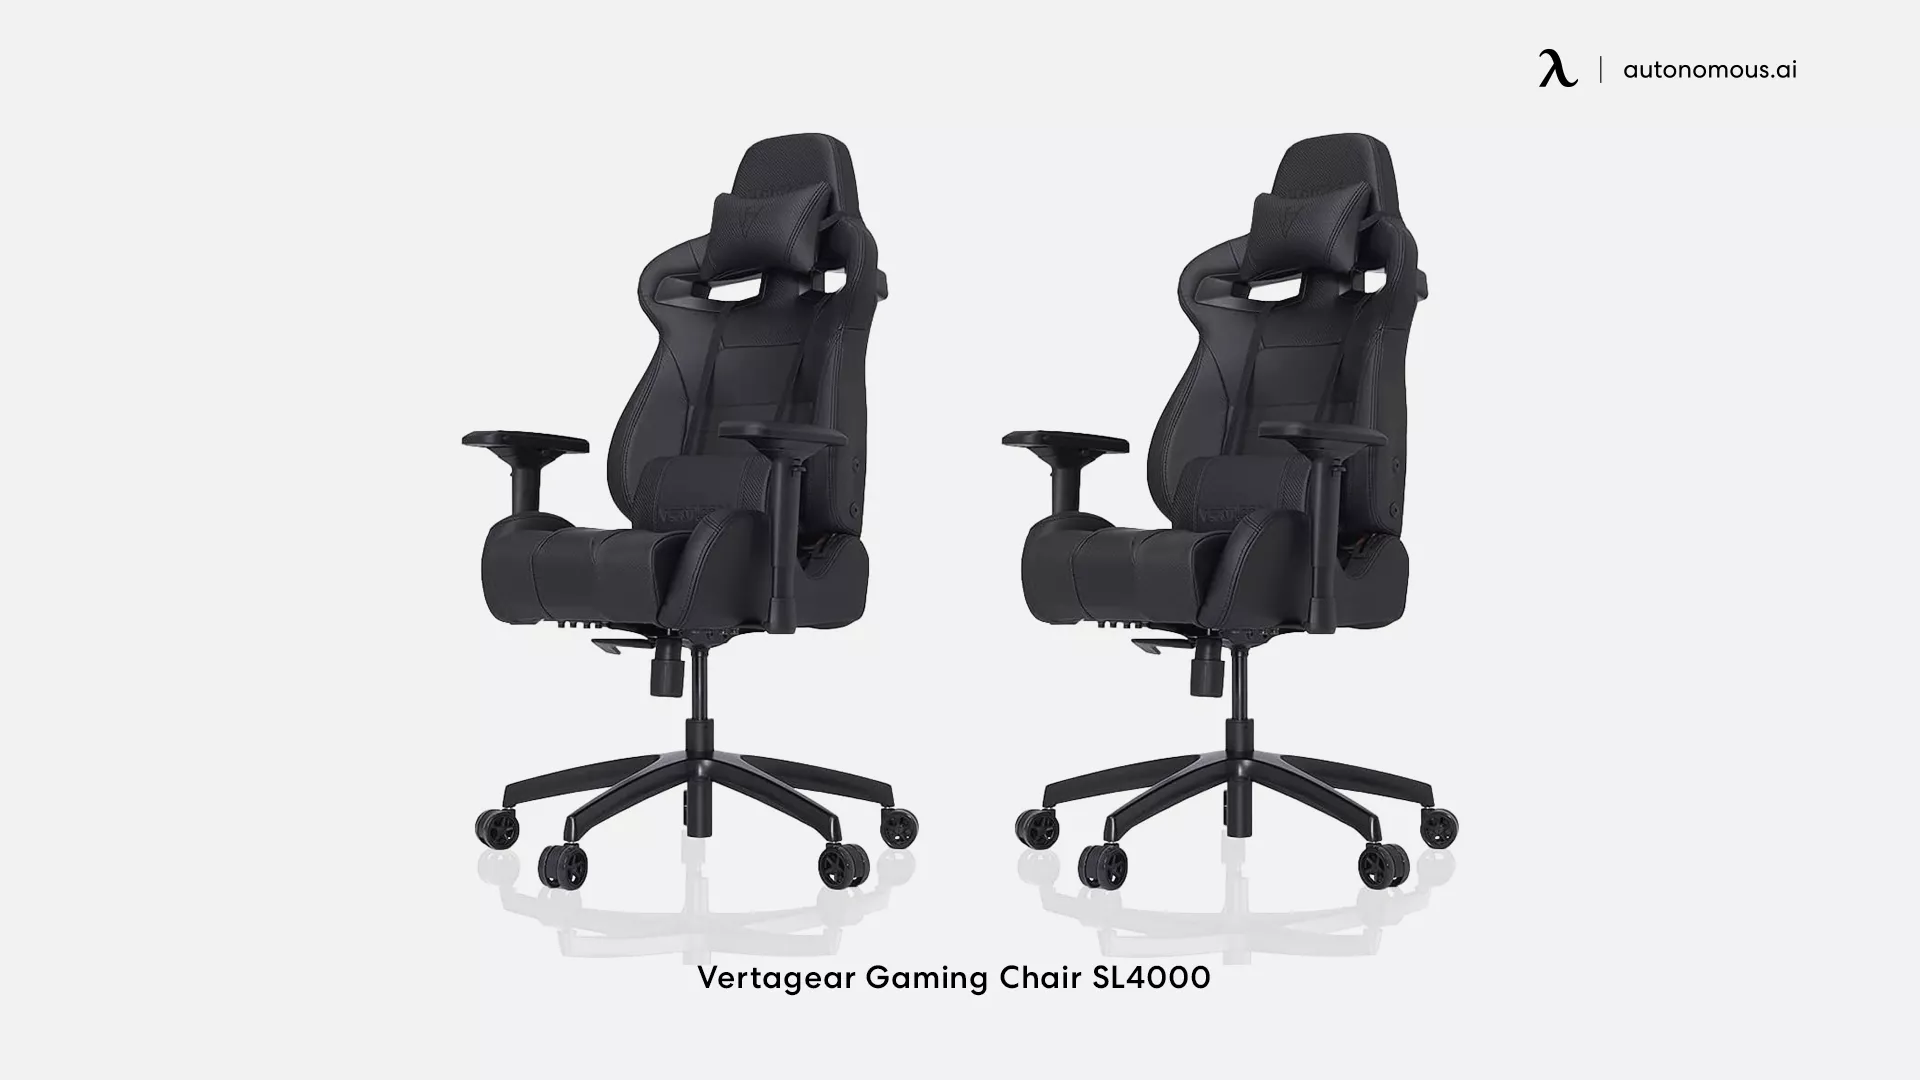 SL4000 Gaming Chair by Vertagear